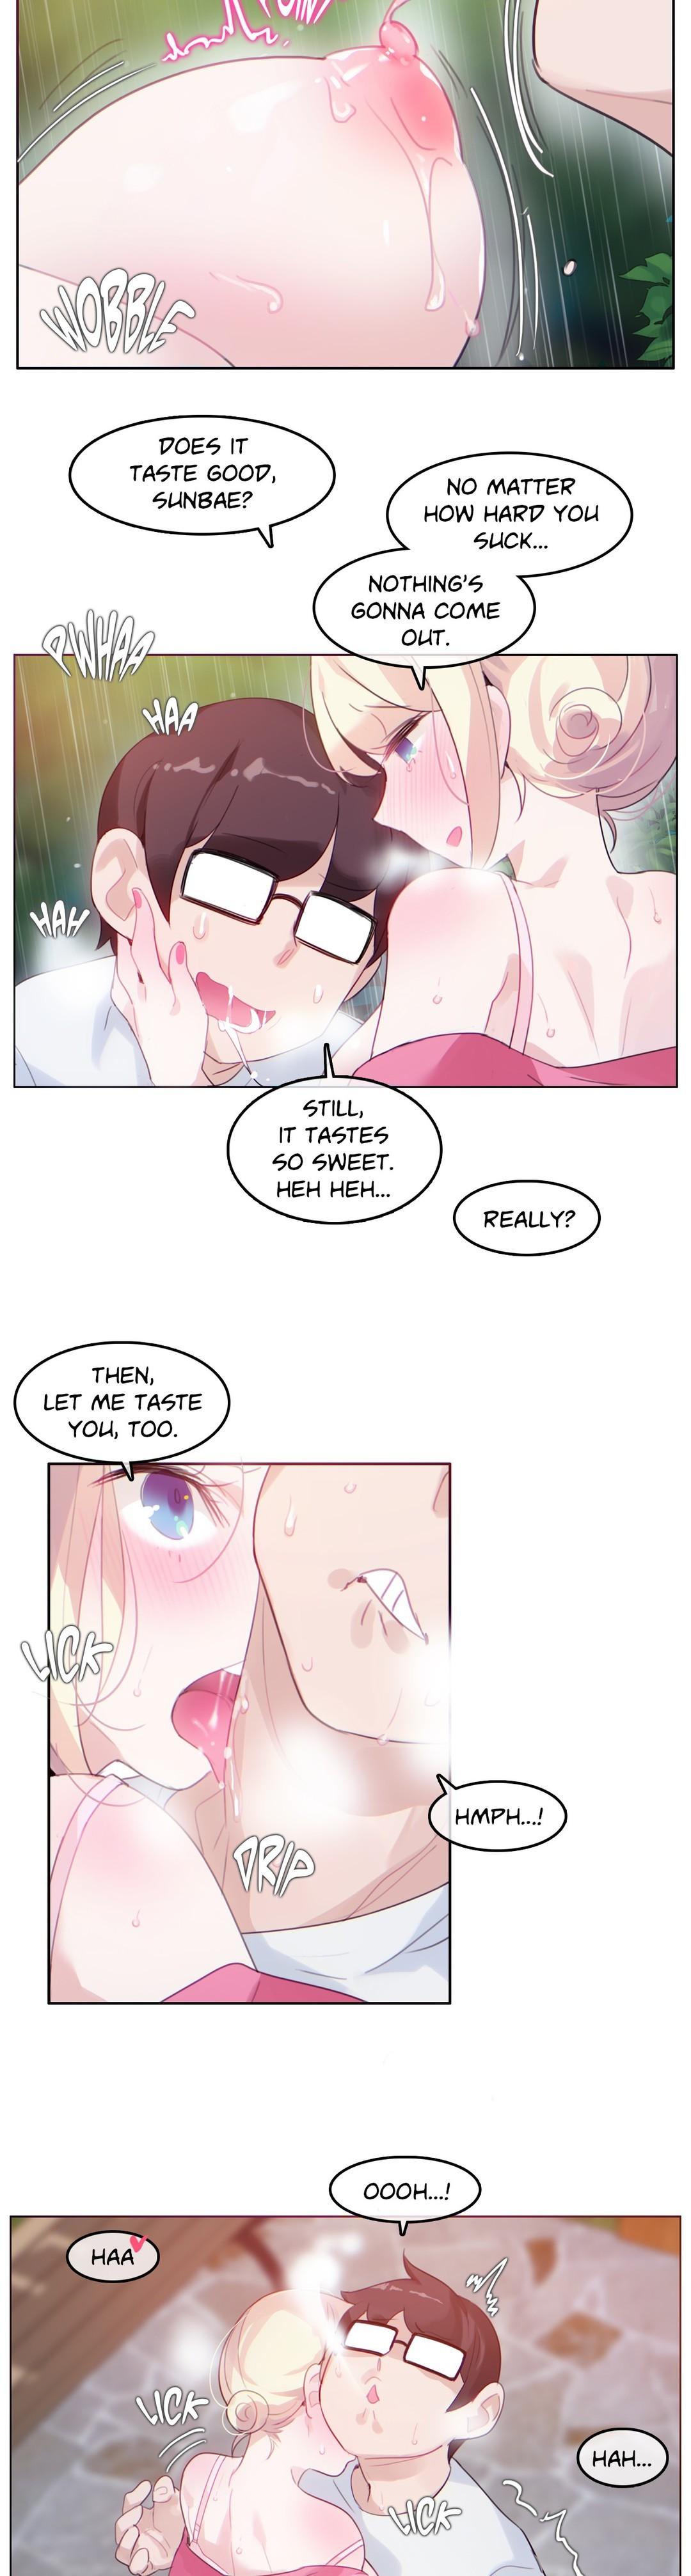 A Pervert's Daily Life Ch. 1-34 662